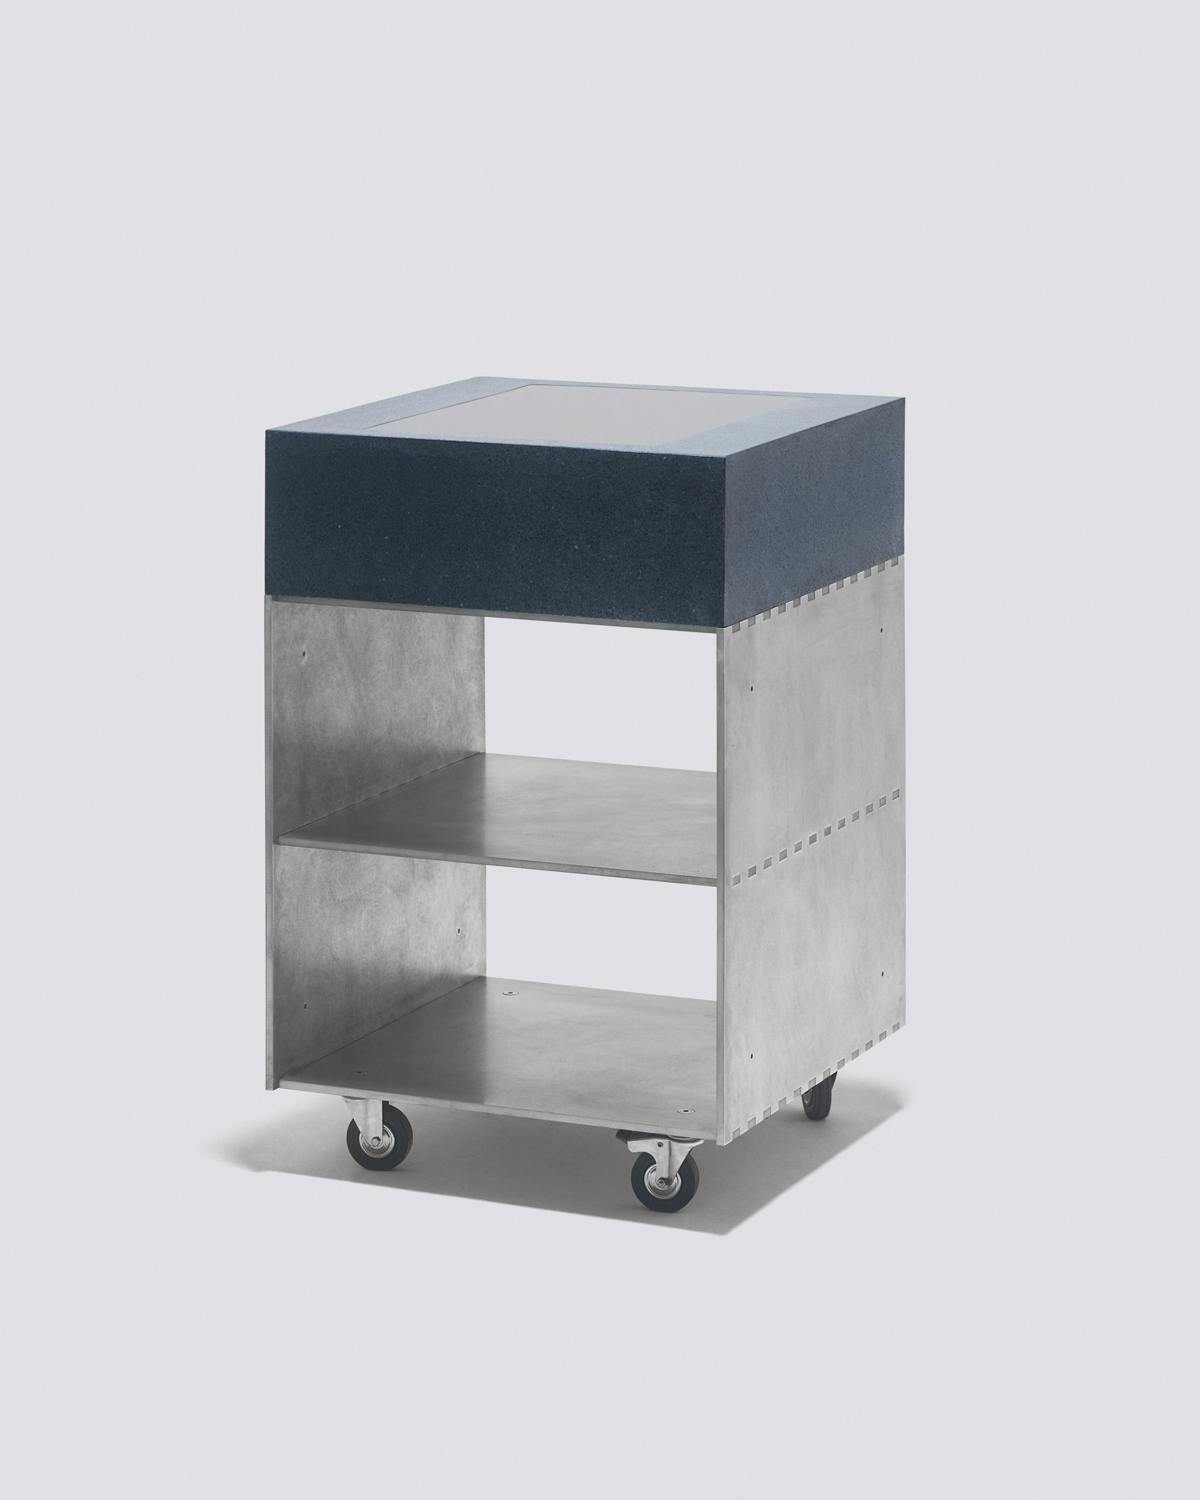 A metal kitchen module with a blue top